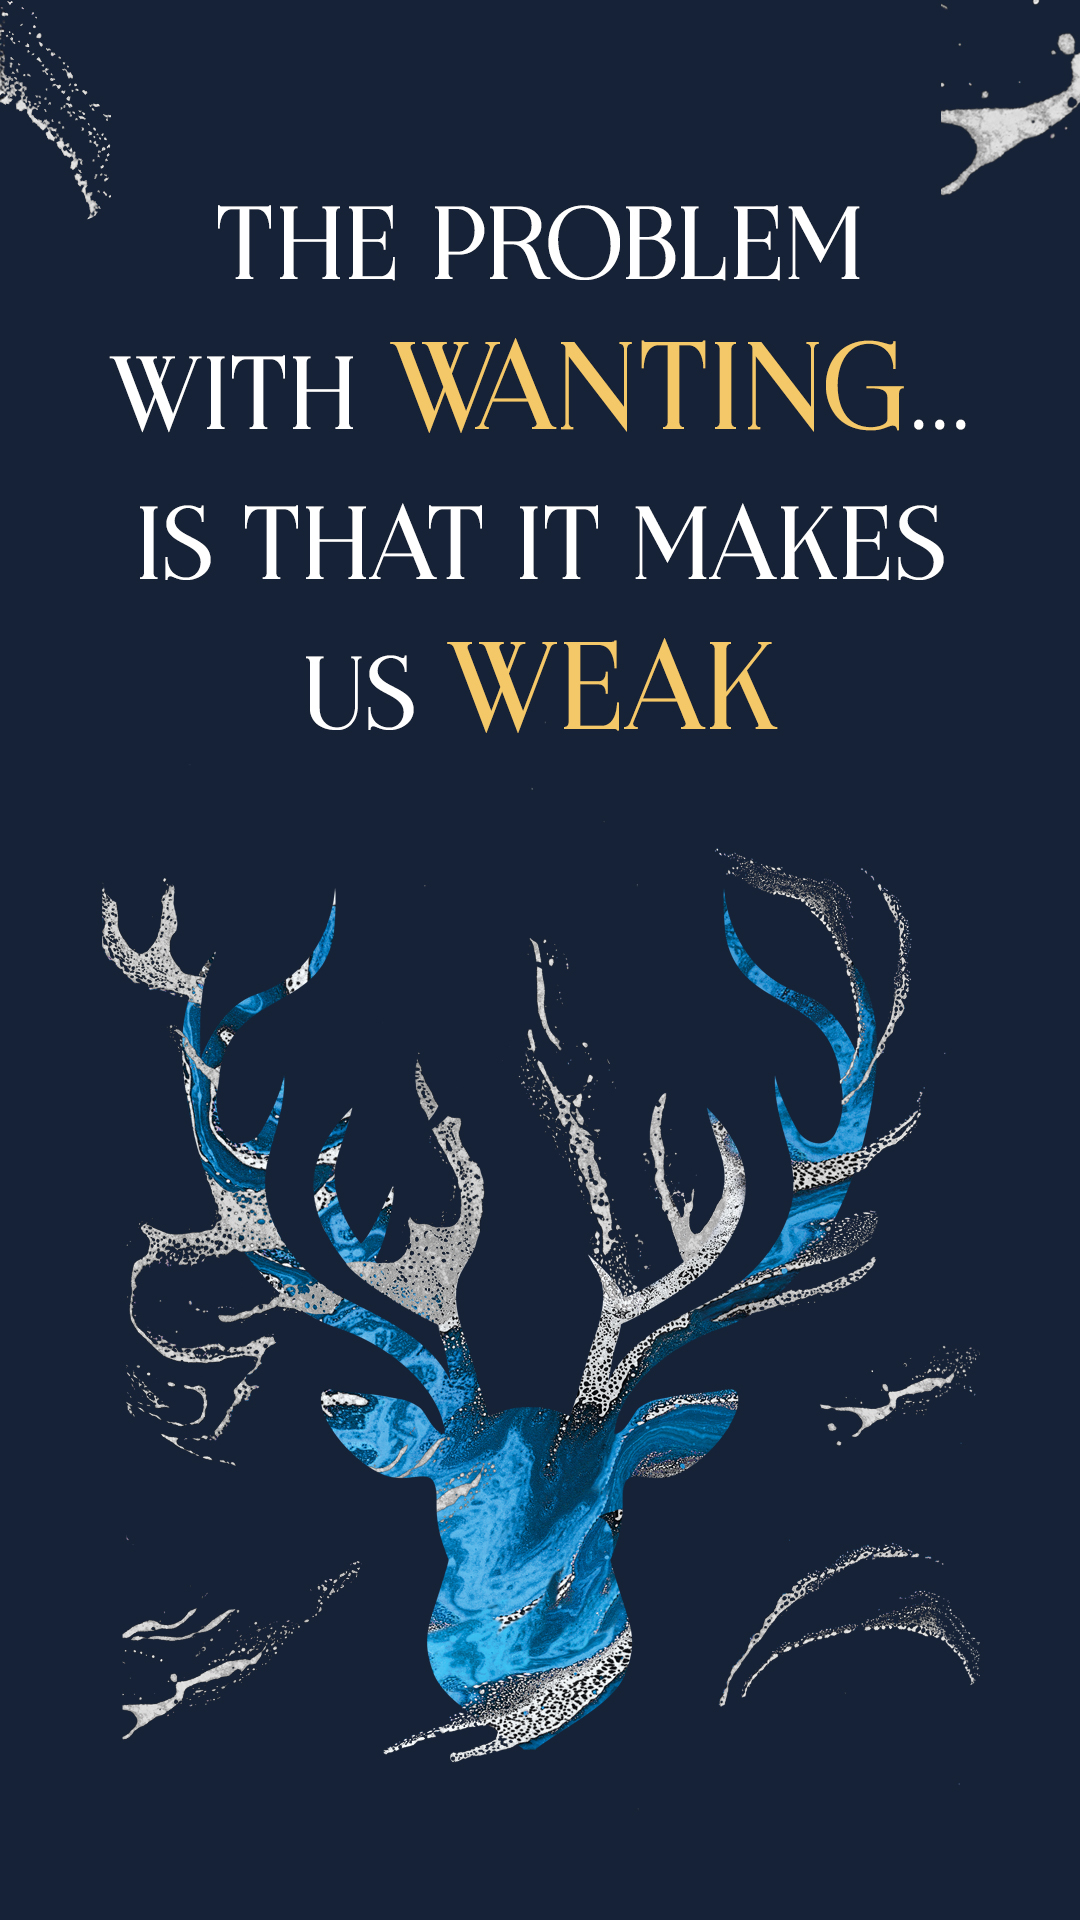 Book cover featuring a stylized deer with antlers that transition into birds, against a dark blue background with the text "the problem with wanting... makes us weak" in white.